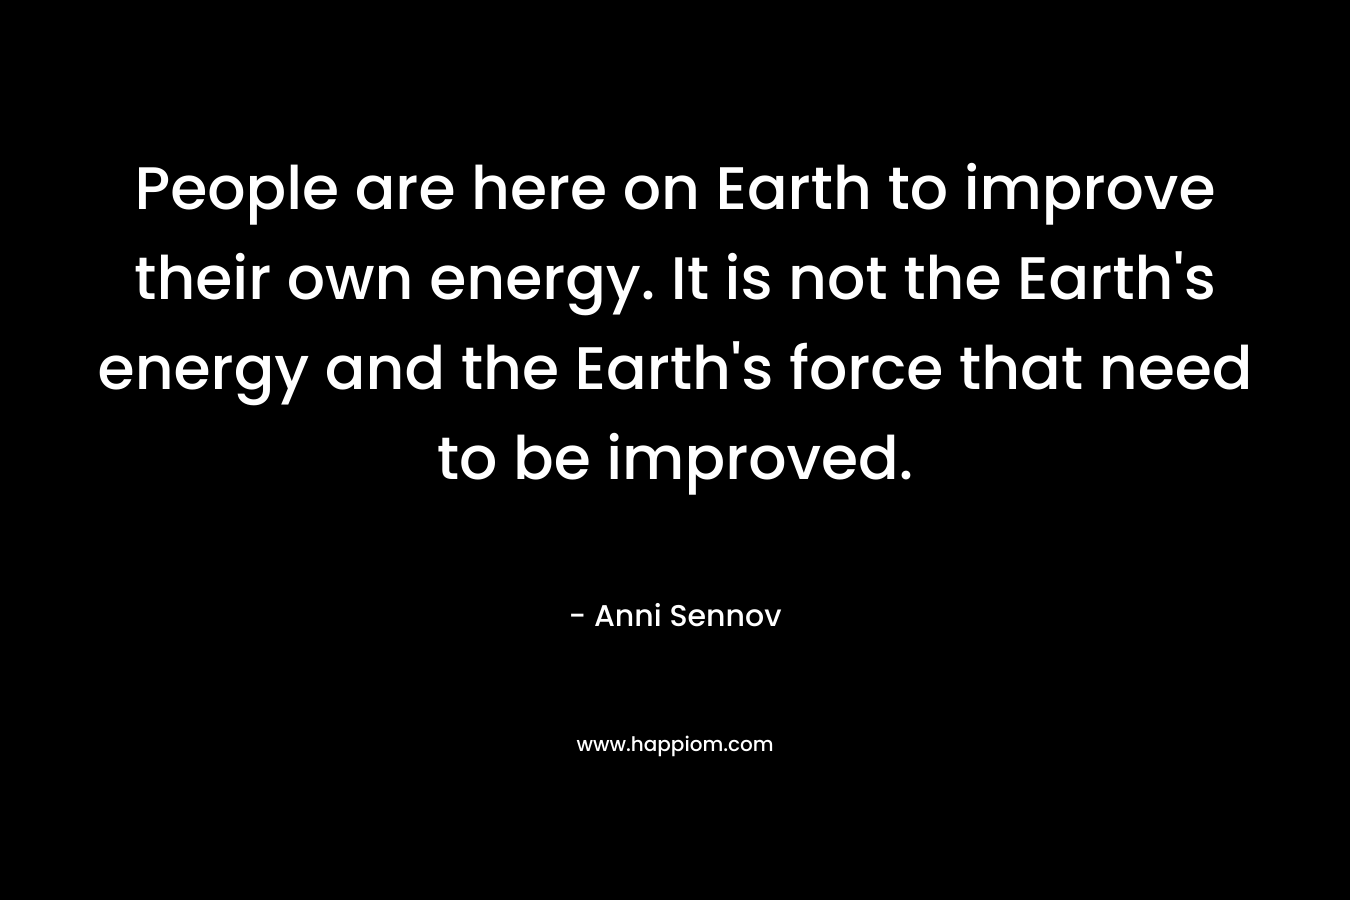 People are here on Earth to improve their own energy. It is not the Earth’s energy and the Earth’s force that need to be improved. – Anni Sennov